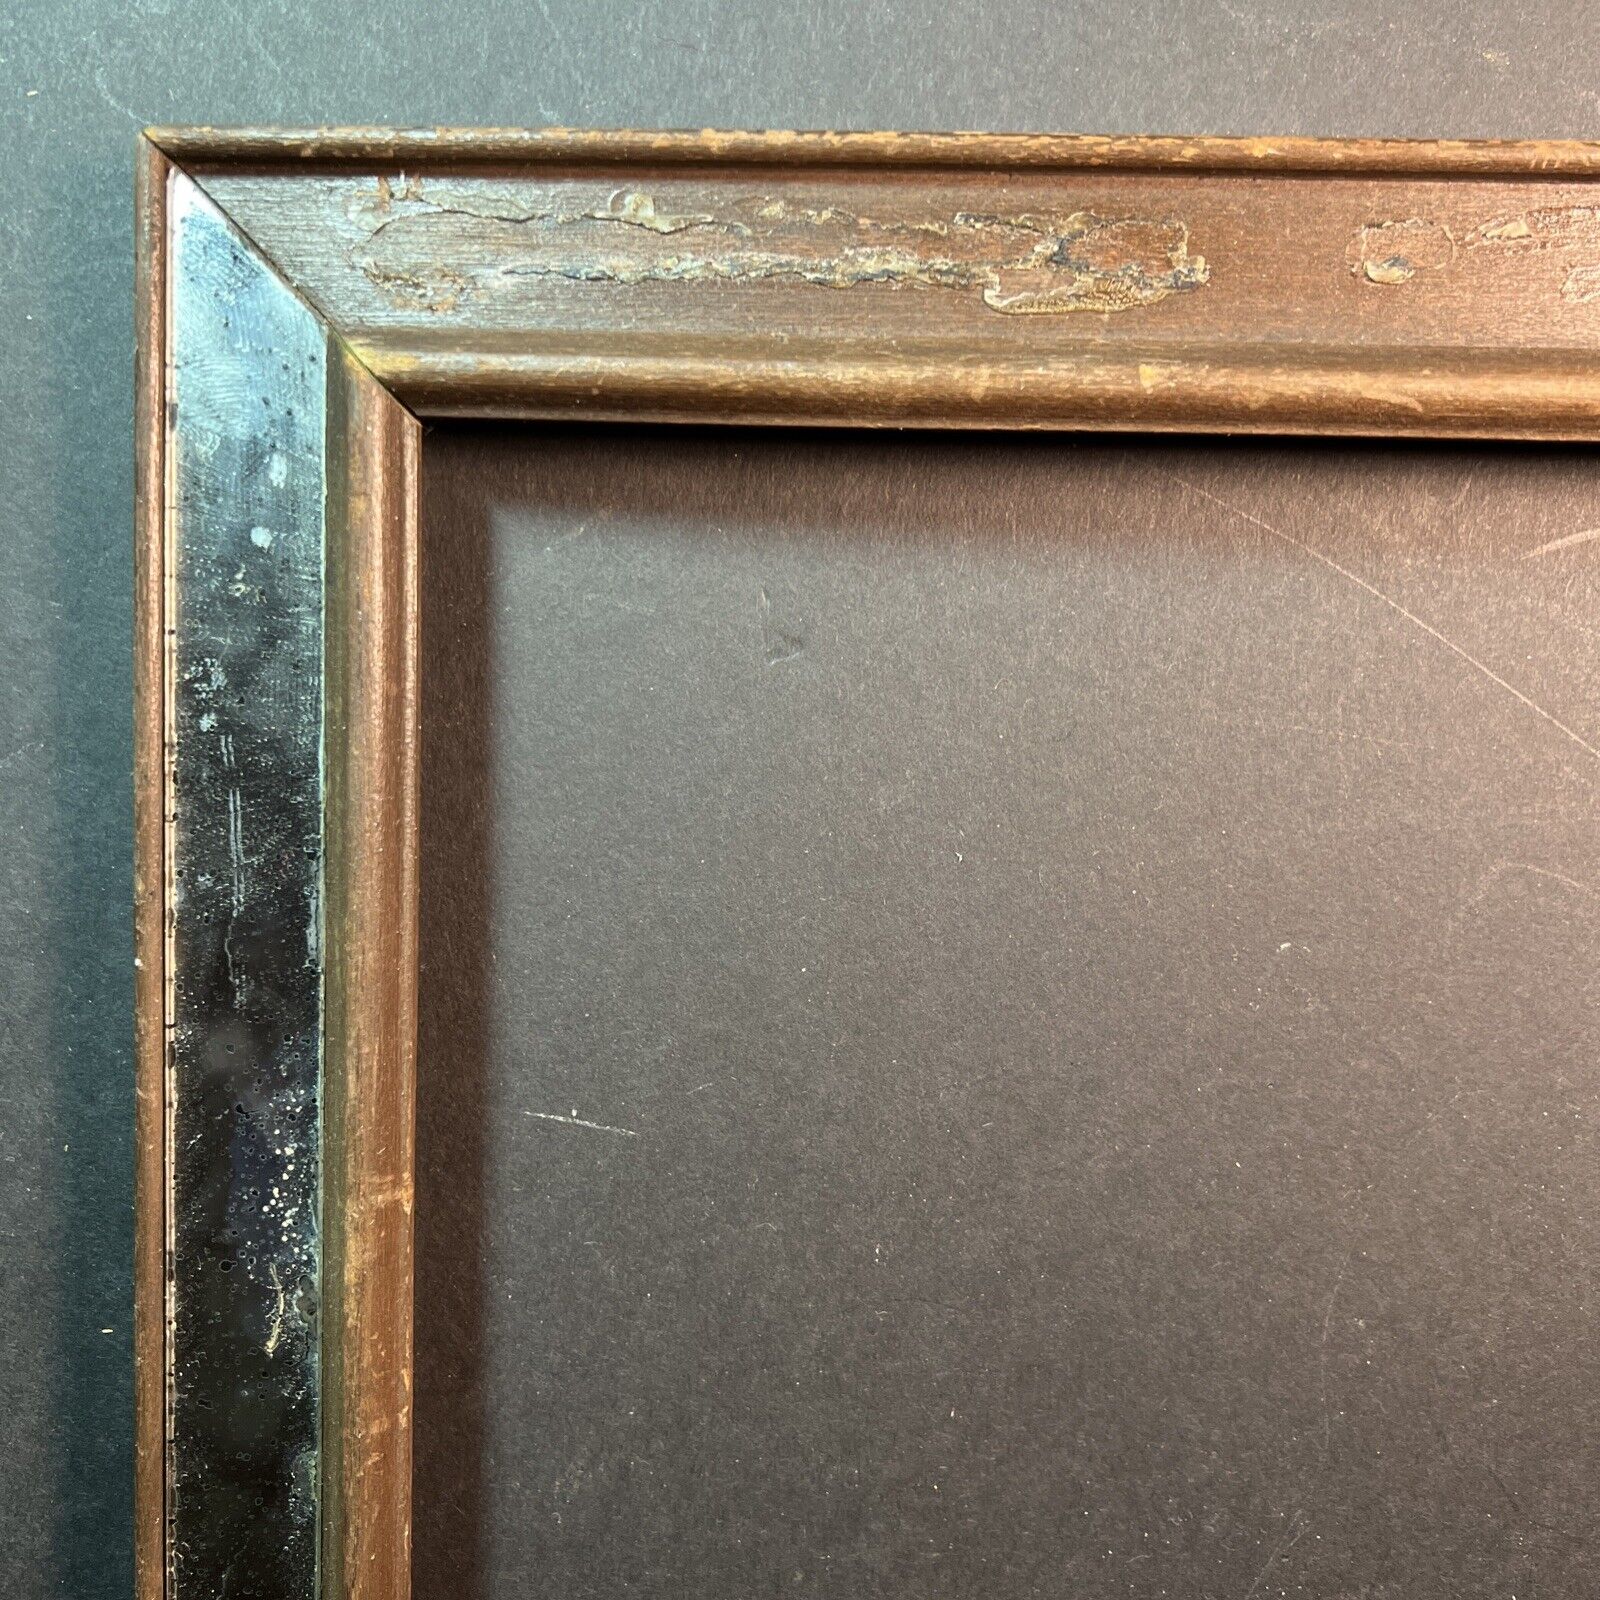 ANTIQUE MIRROR PICTURE FRAME 12 1/2 x 16 1/2 FITS 10 x 14 PHOTO GESSO BROWN RARE